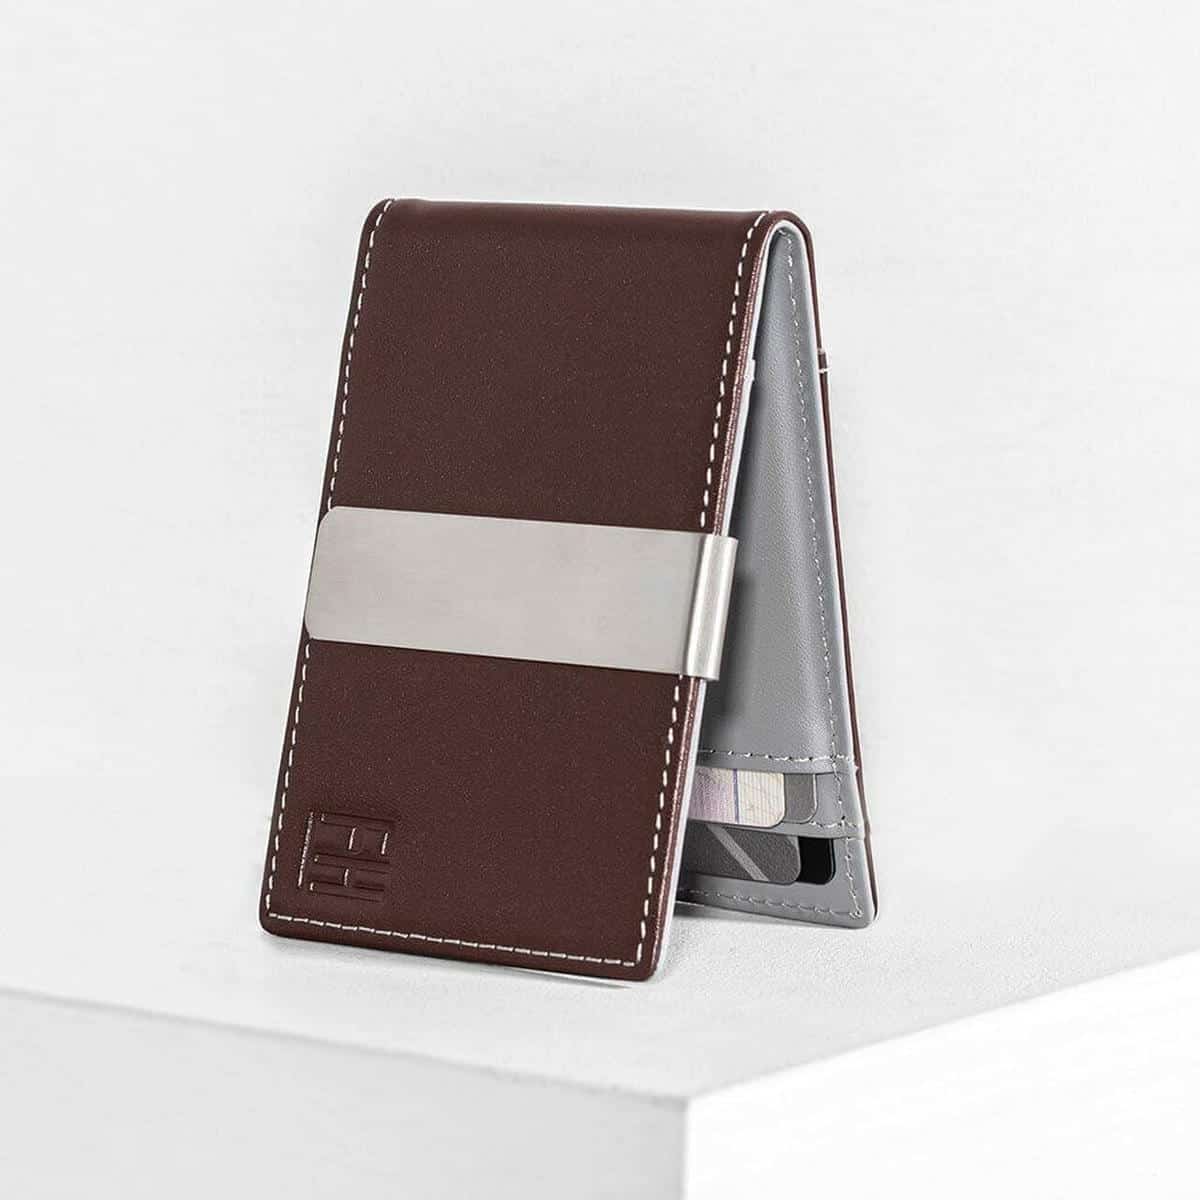 Tapp Collections™ Silver Stainless Steel Slim Money Clip 